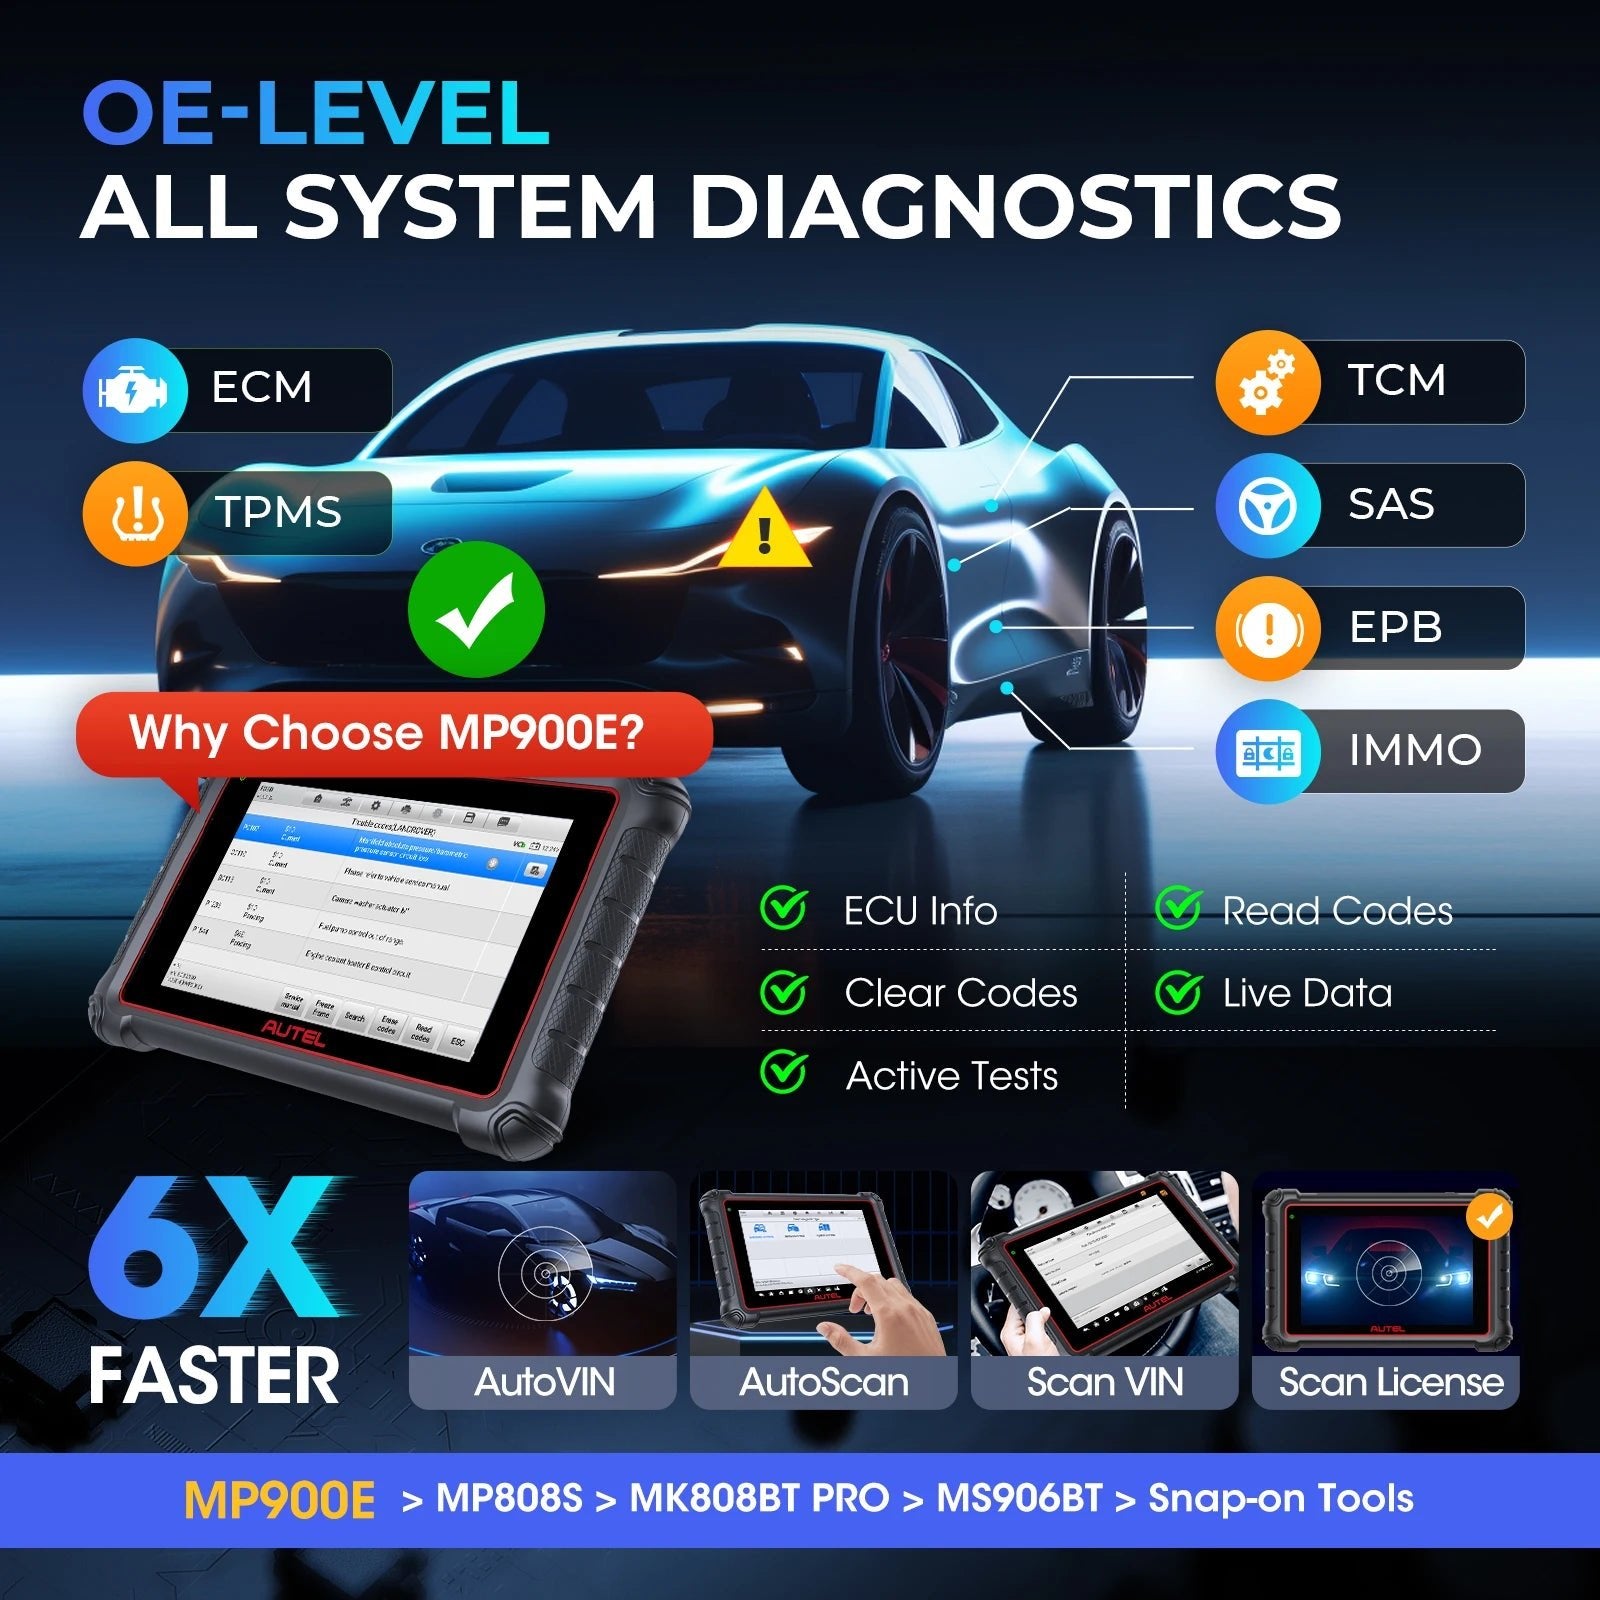 Autel MaxiPRO MP900E KIT Diagnostic Scanner Newer of MP808BT PRO CANFD DoIP Diagnostic Tools Bi-Directional Automotive Scan Tool - Dynamex